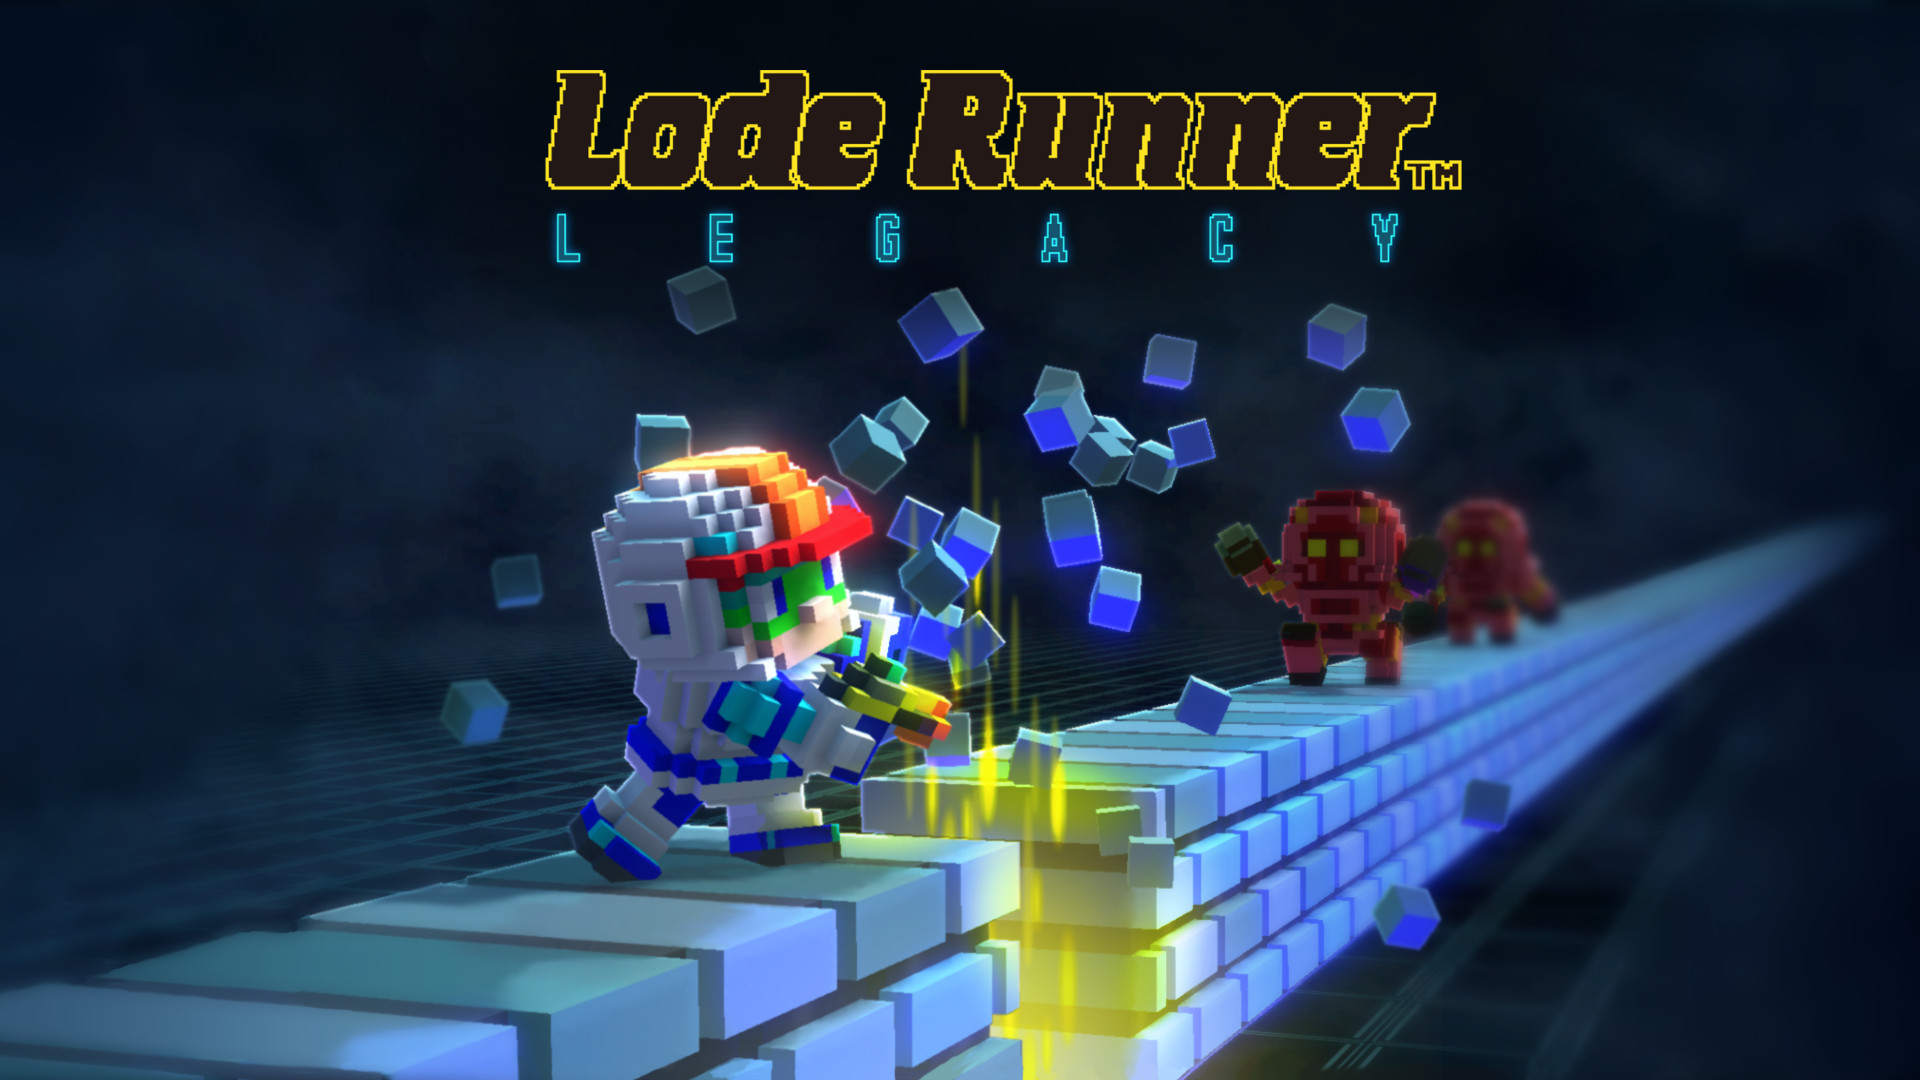 Lode Runner Legacy Heading to PS4 on Jan. 29